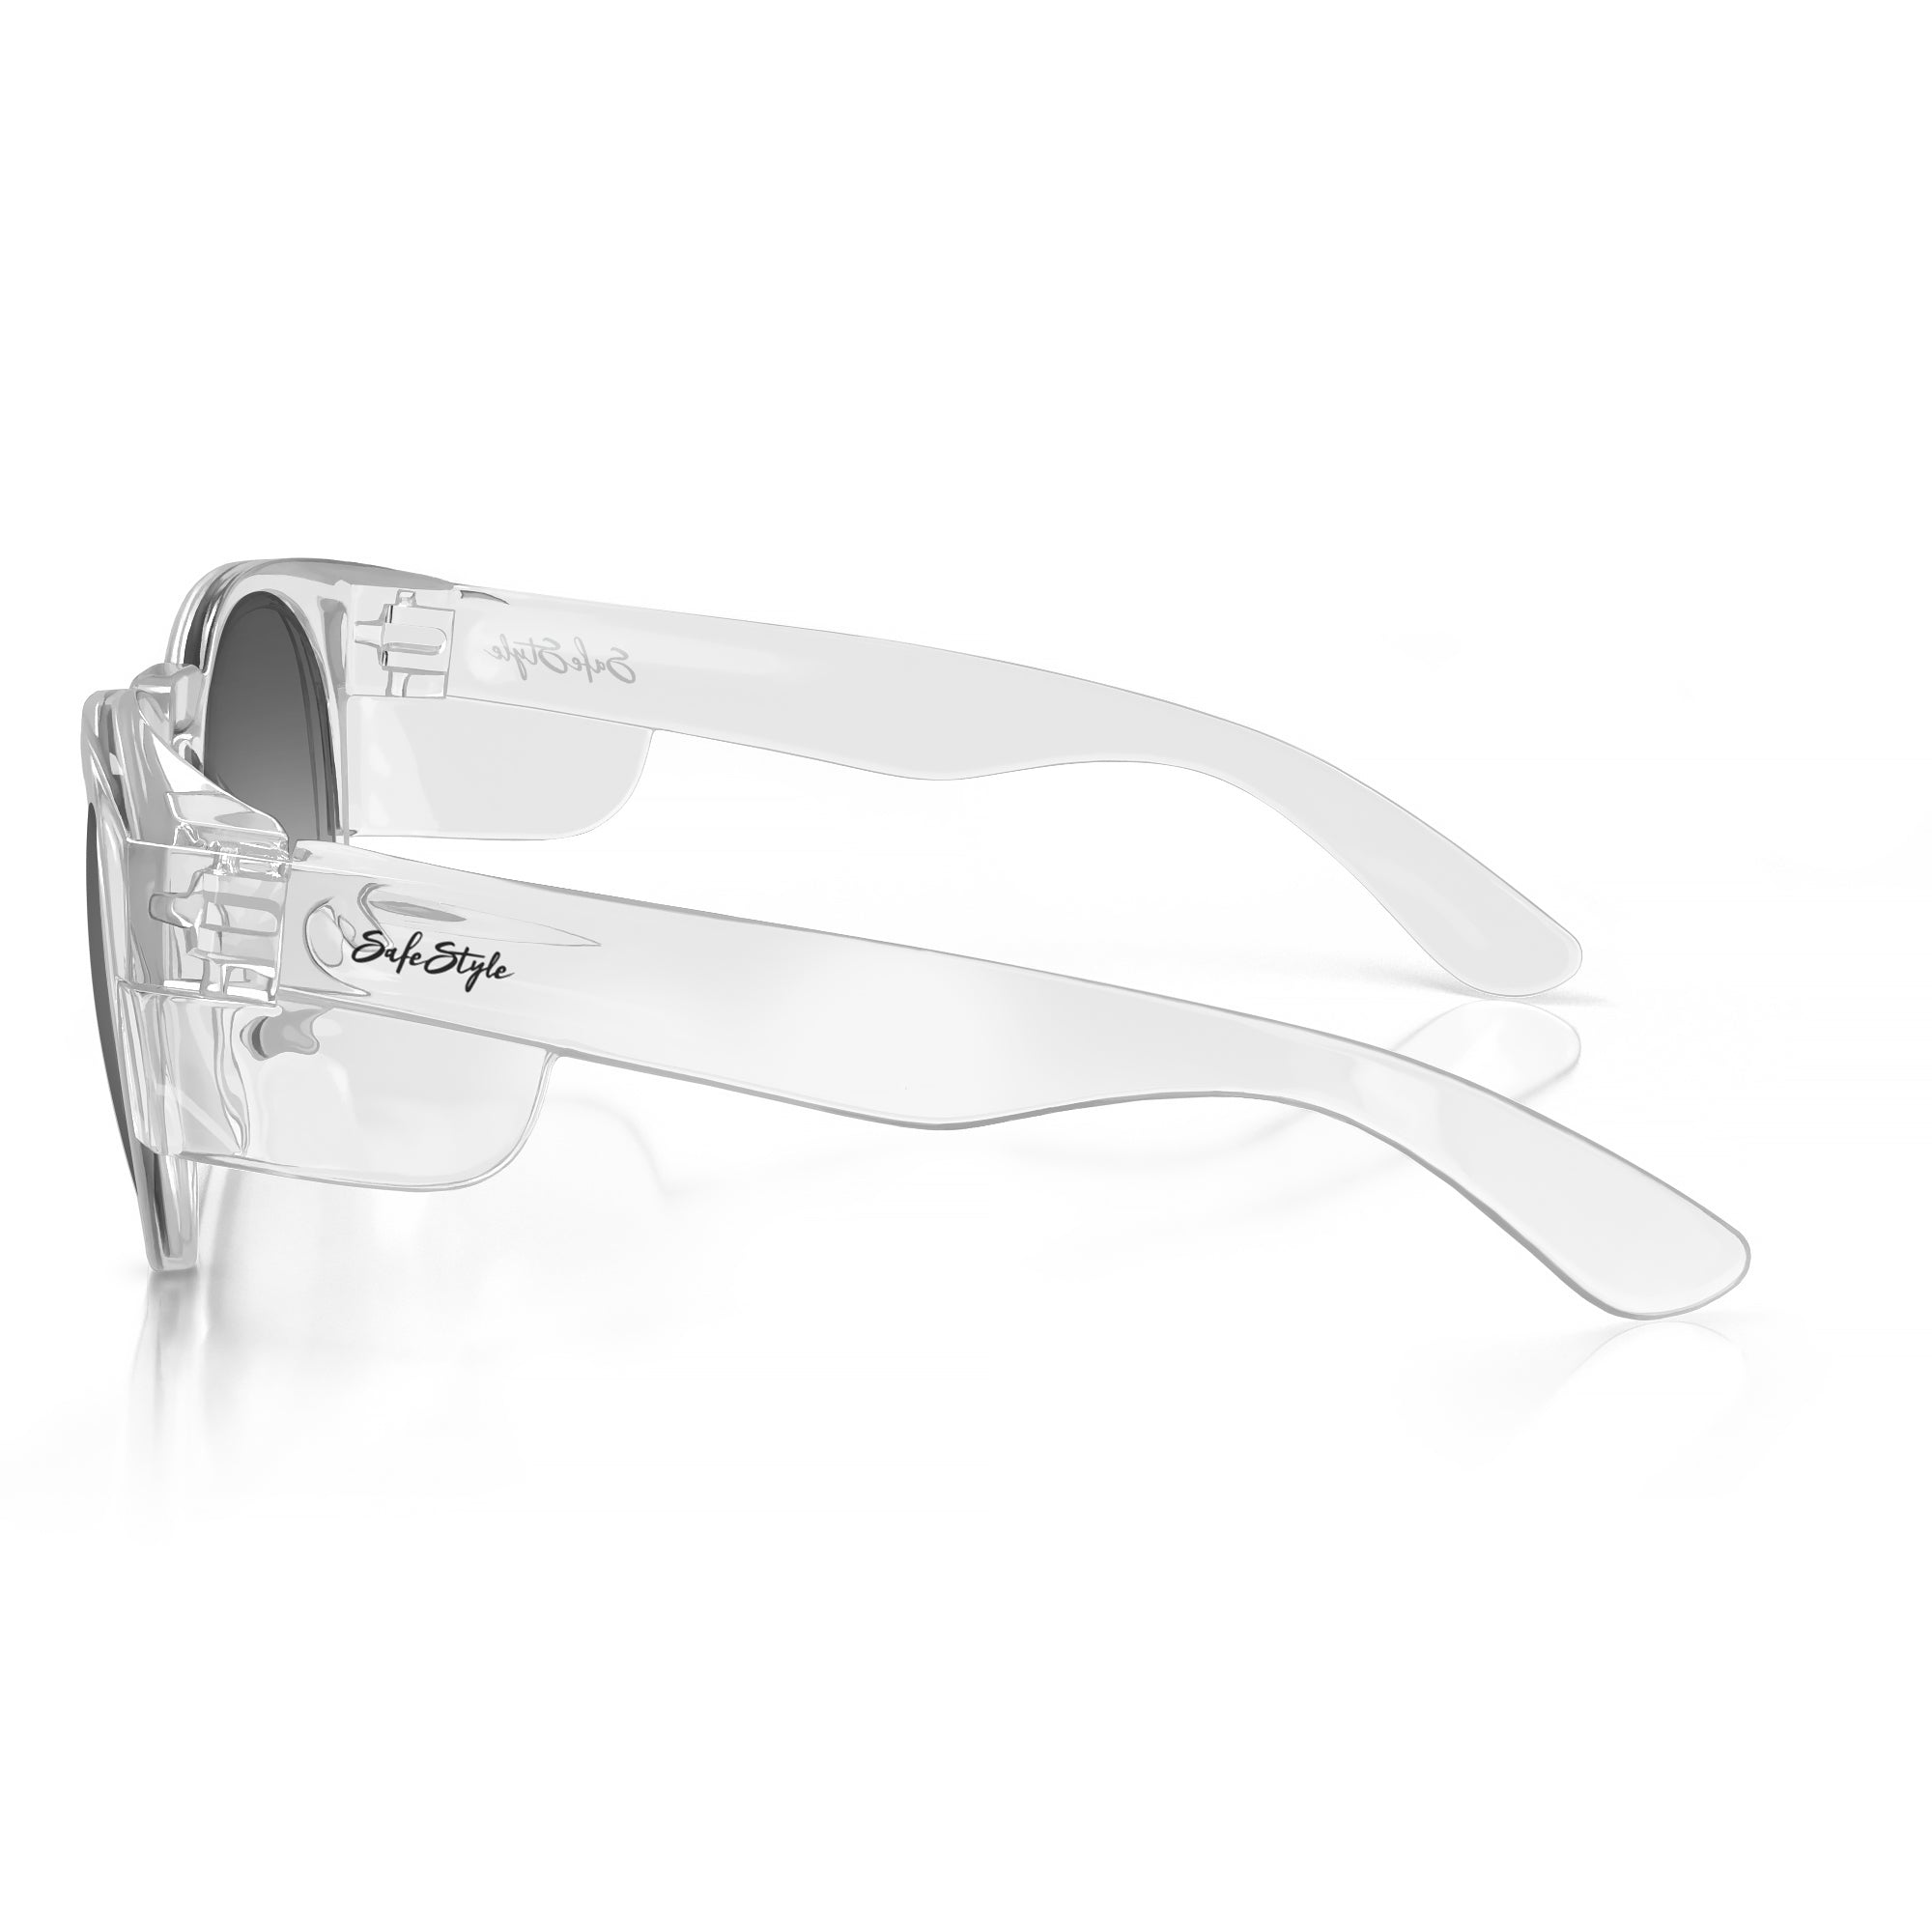 Safestyle - CRCP100 - Cruisers Clear Frame Polarised lens